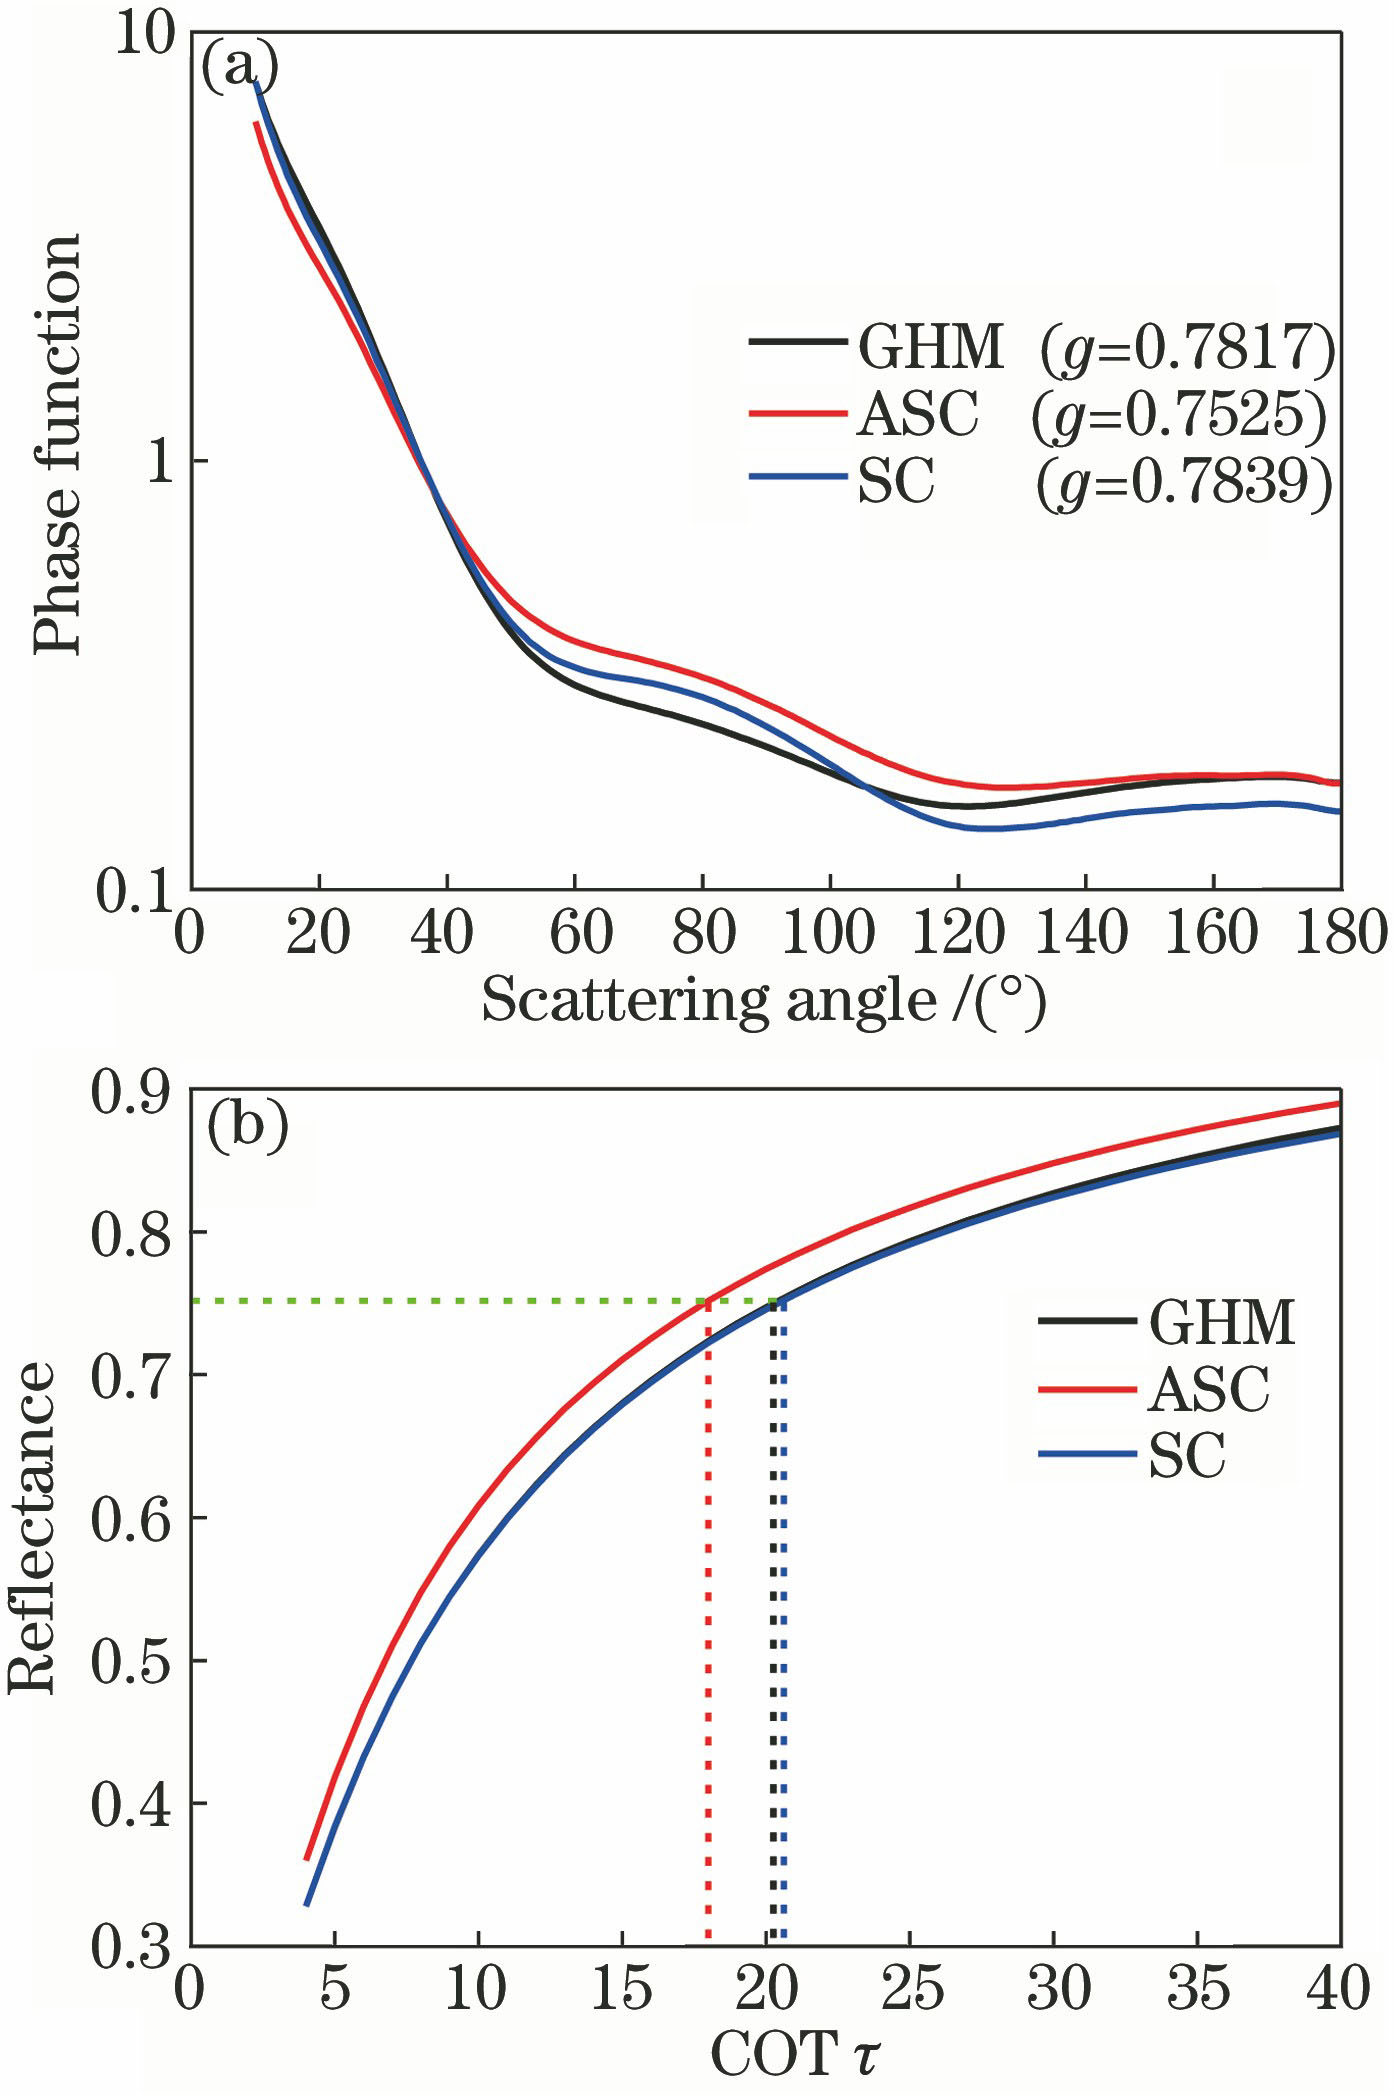 (a) Phase function of different scattering models; (b) values of reflectance as a function of COT for different scattering models